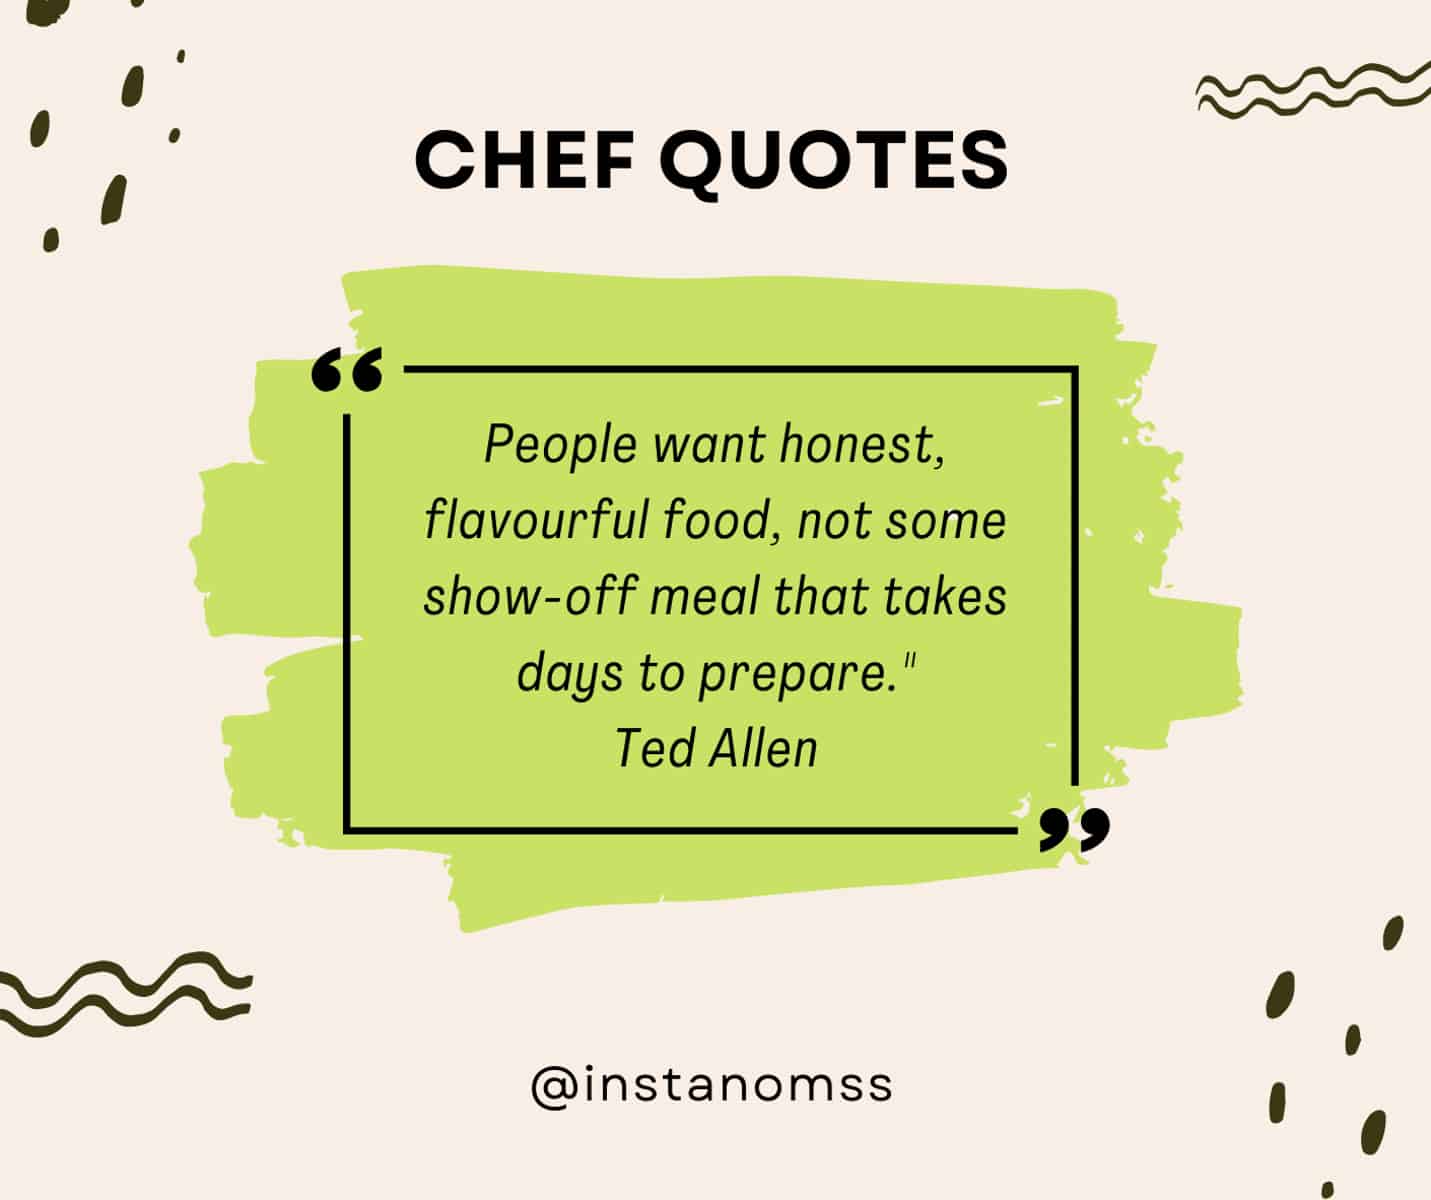 "People want honest, flavourful food, not some show-off meal that takes days to prepare." Ted Allen